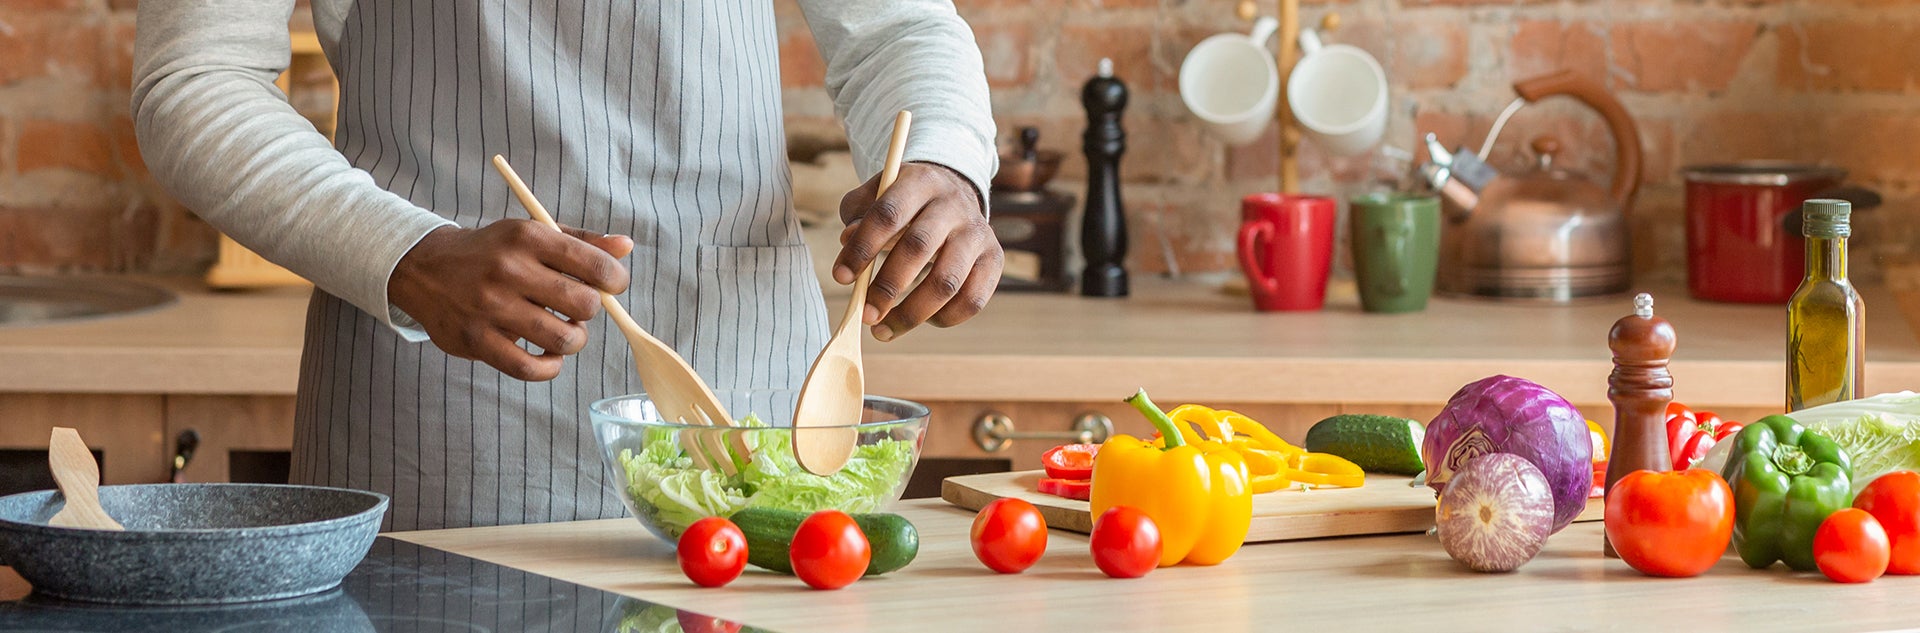 Healthy Cooking and Recipes banner